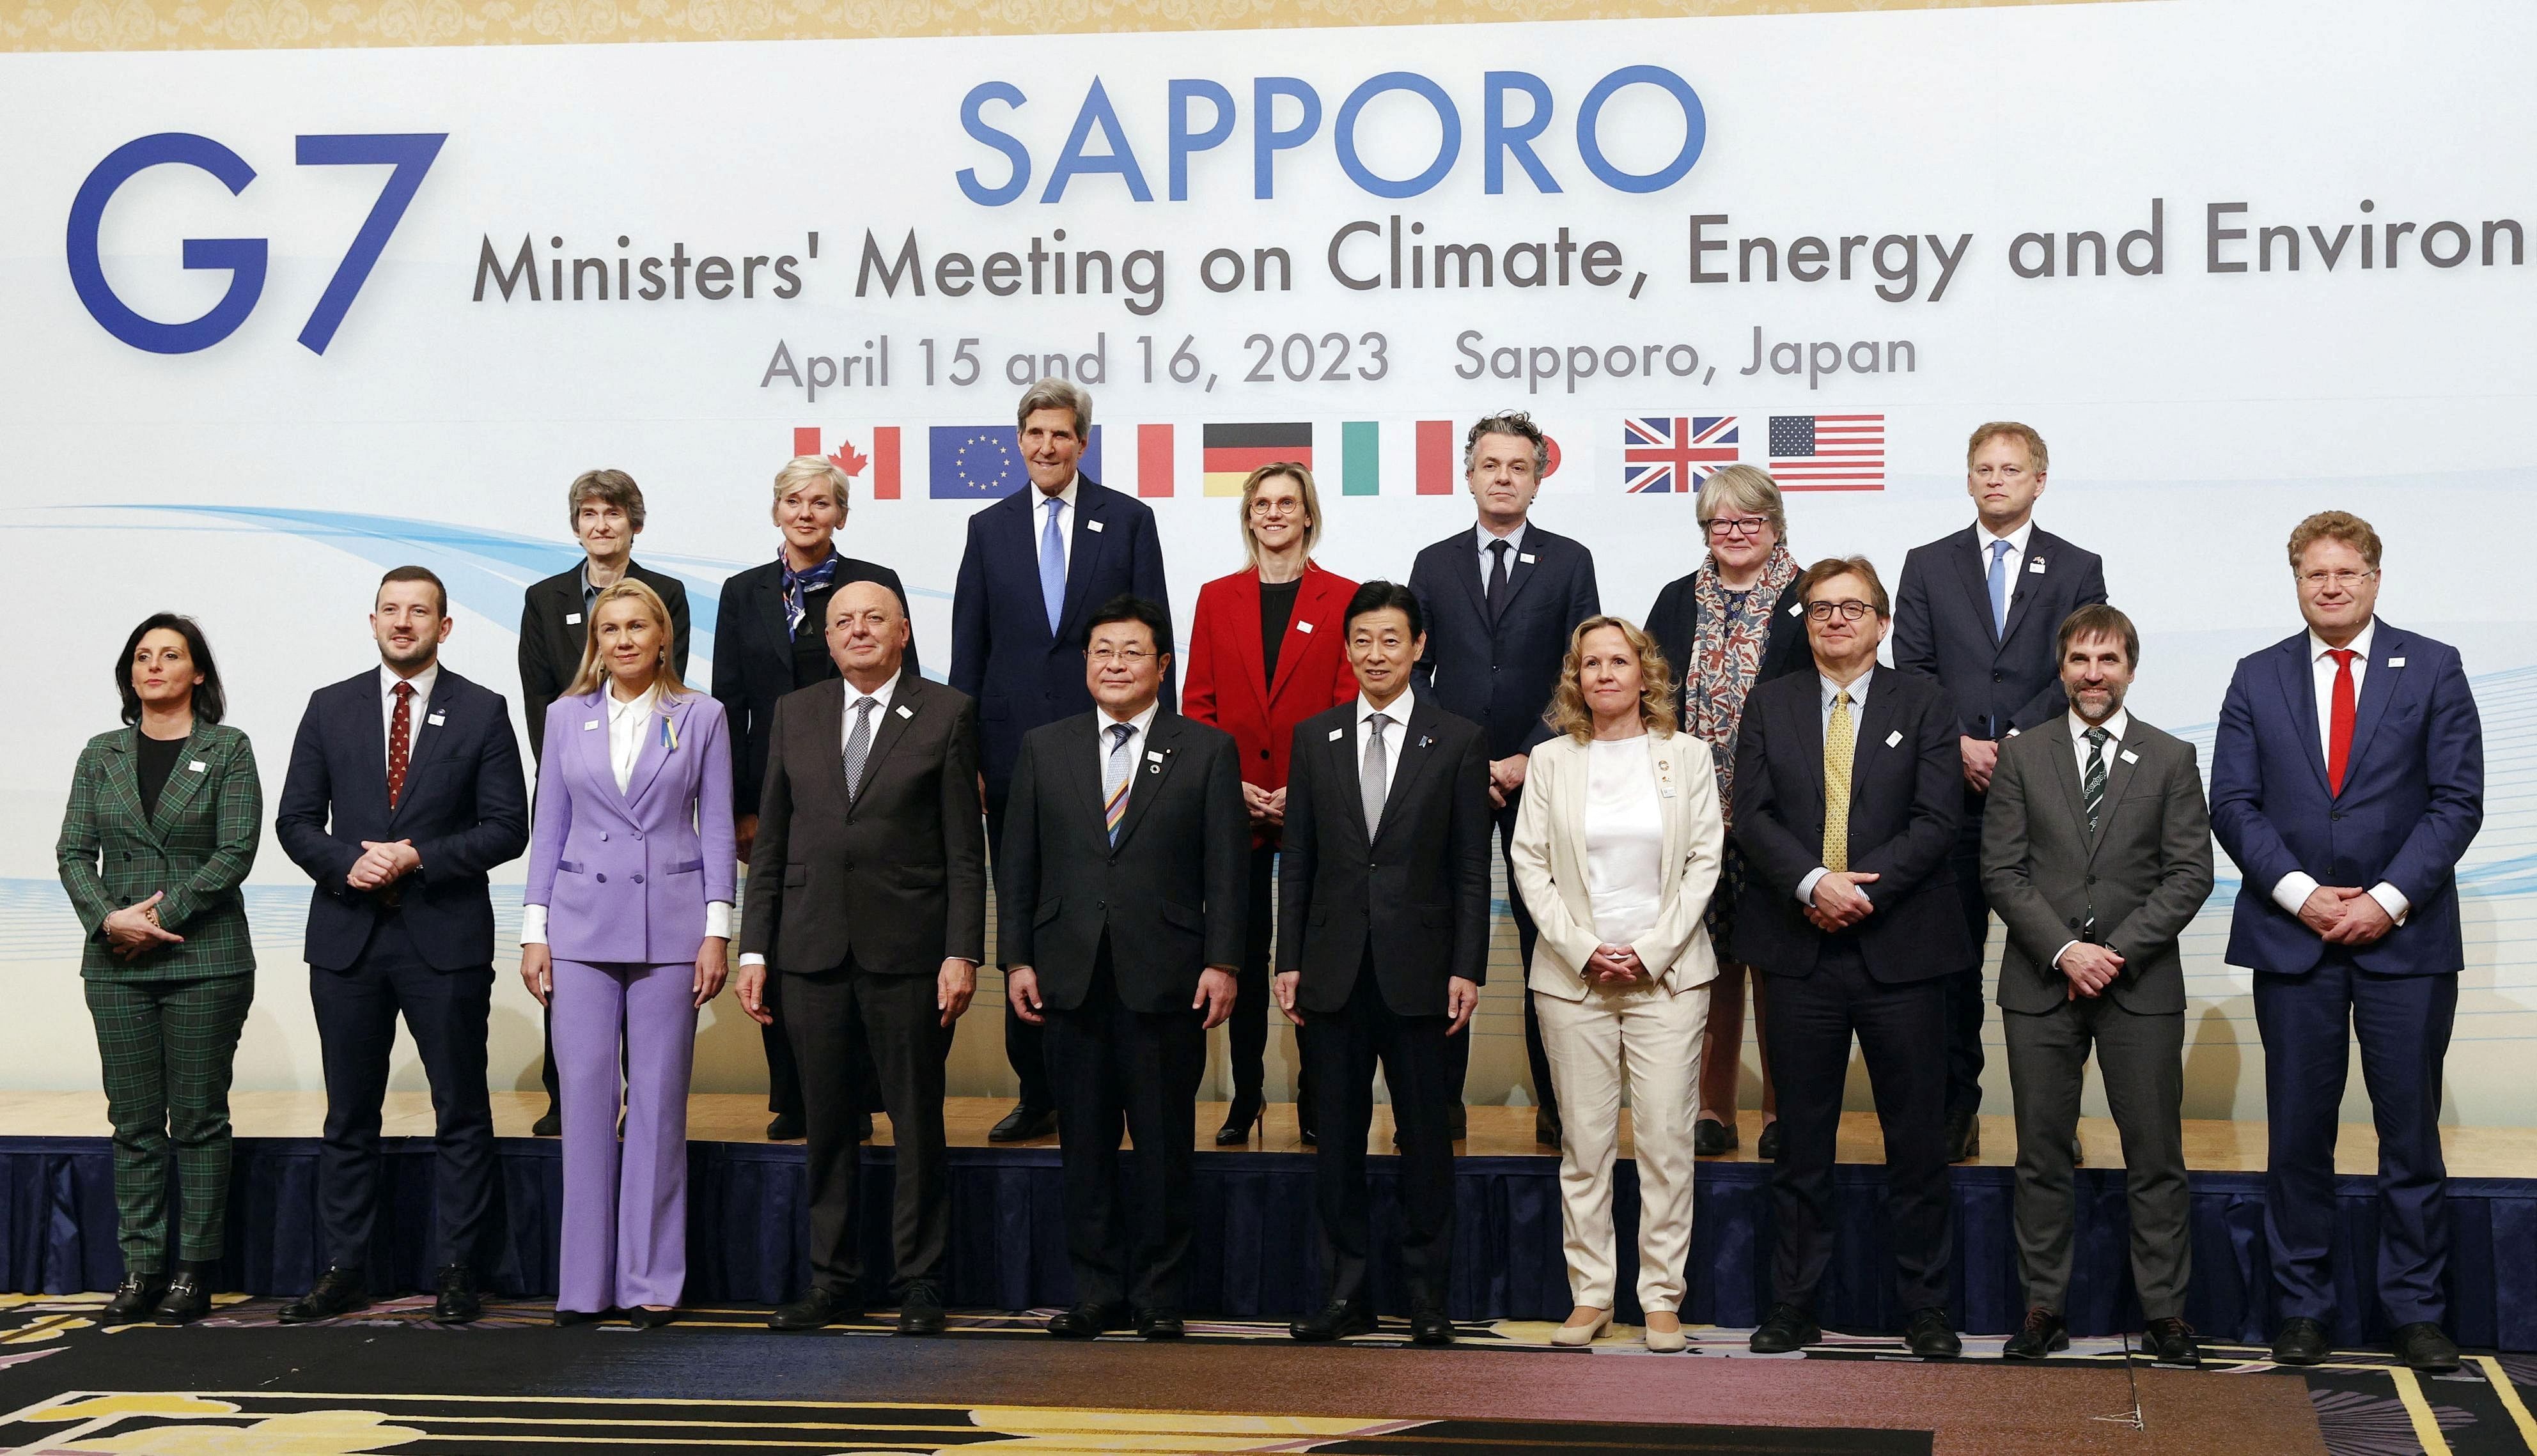 Japan's Minister of Economy, Trade and Industry Yasutoshi Nishimura, Environment Minister Akihiro Nishimura and other delegates attend the photo session of G7 Ministers' Meeting on Climate, Energy and Environment. Credit: Reuters Photo